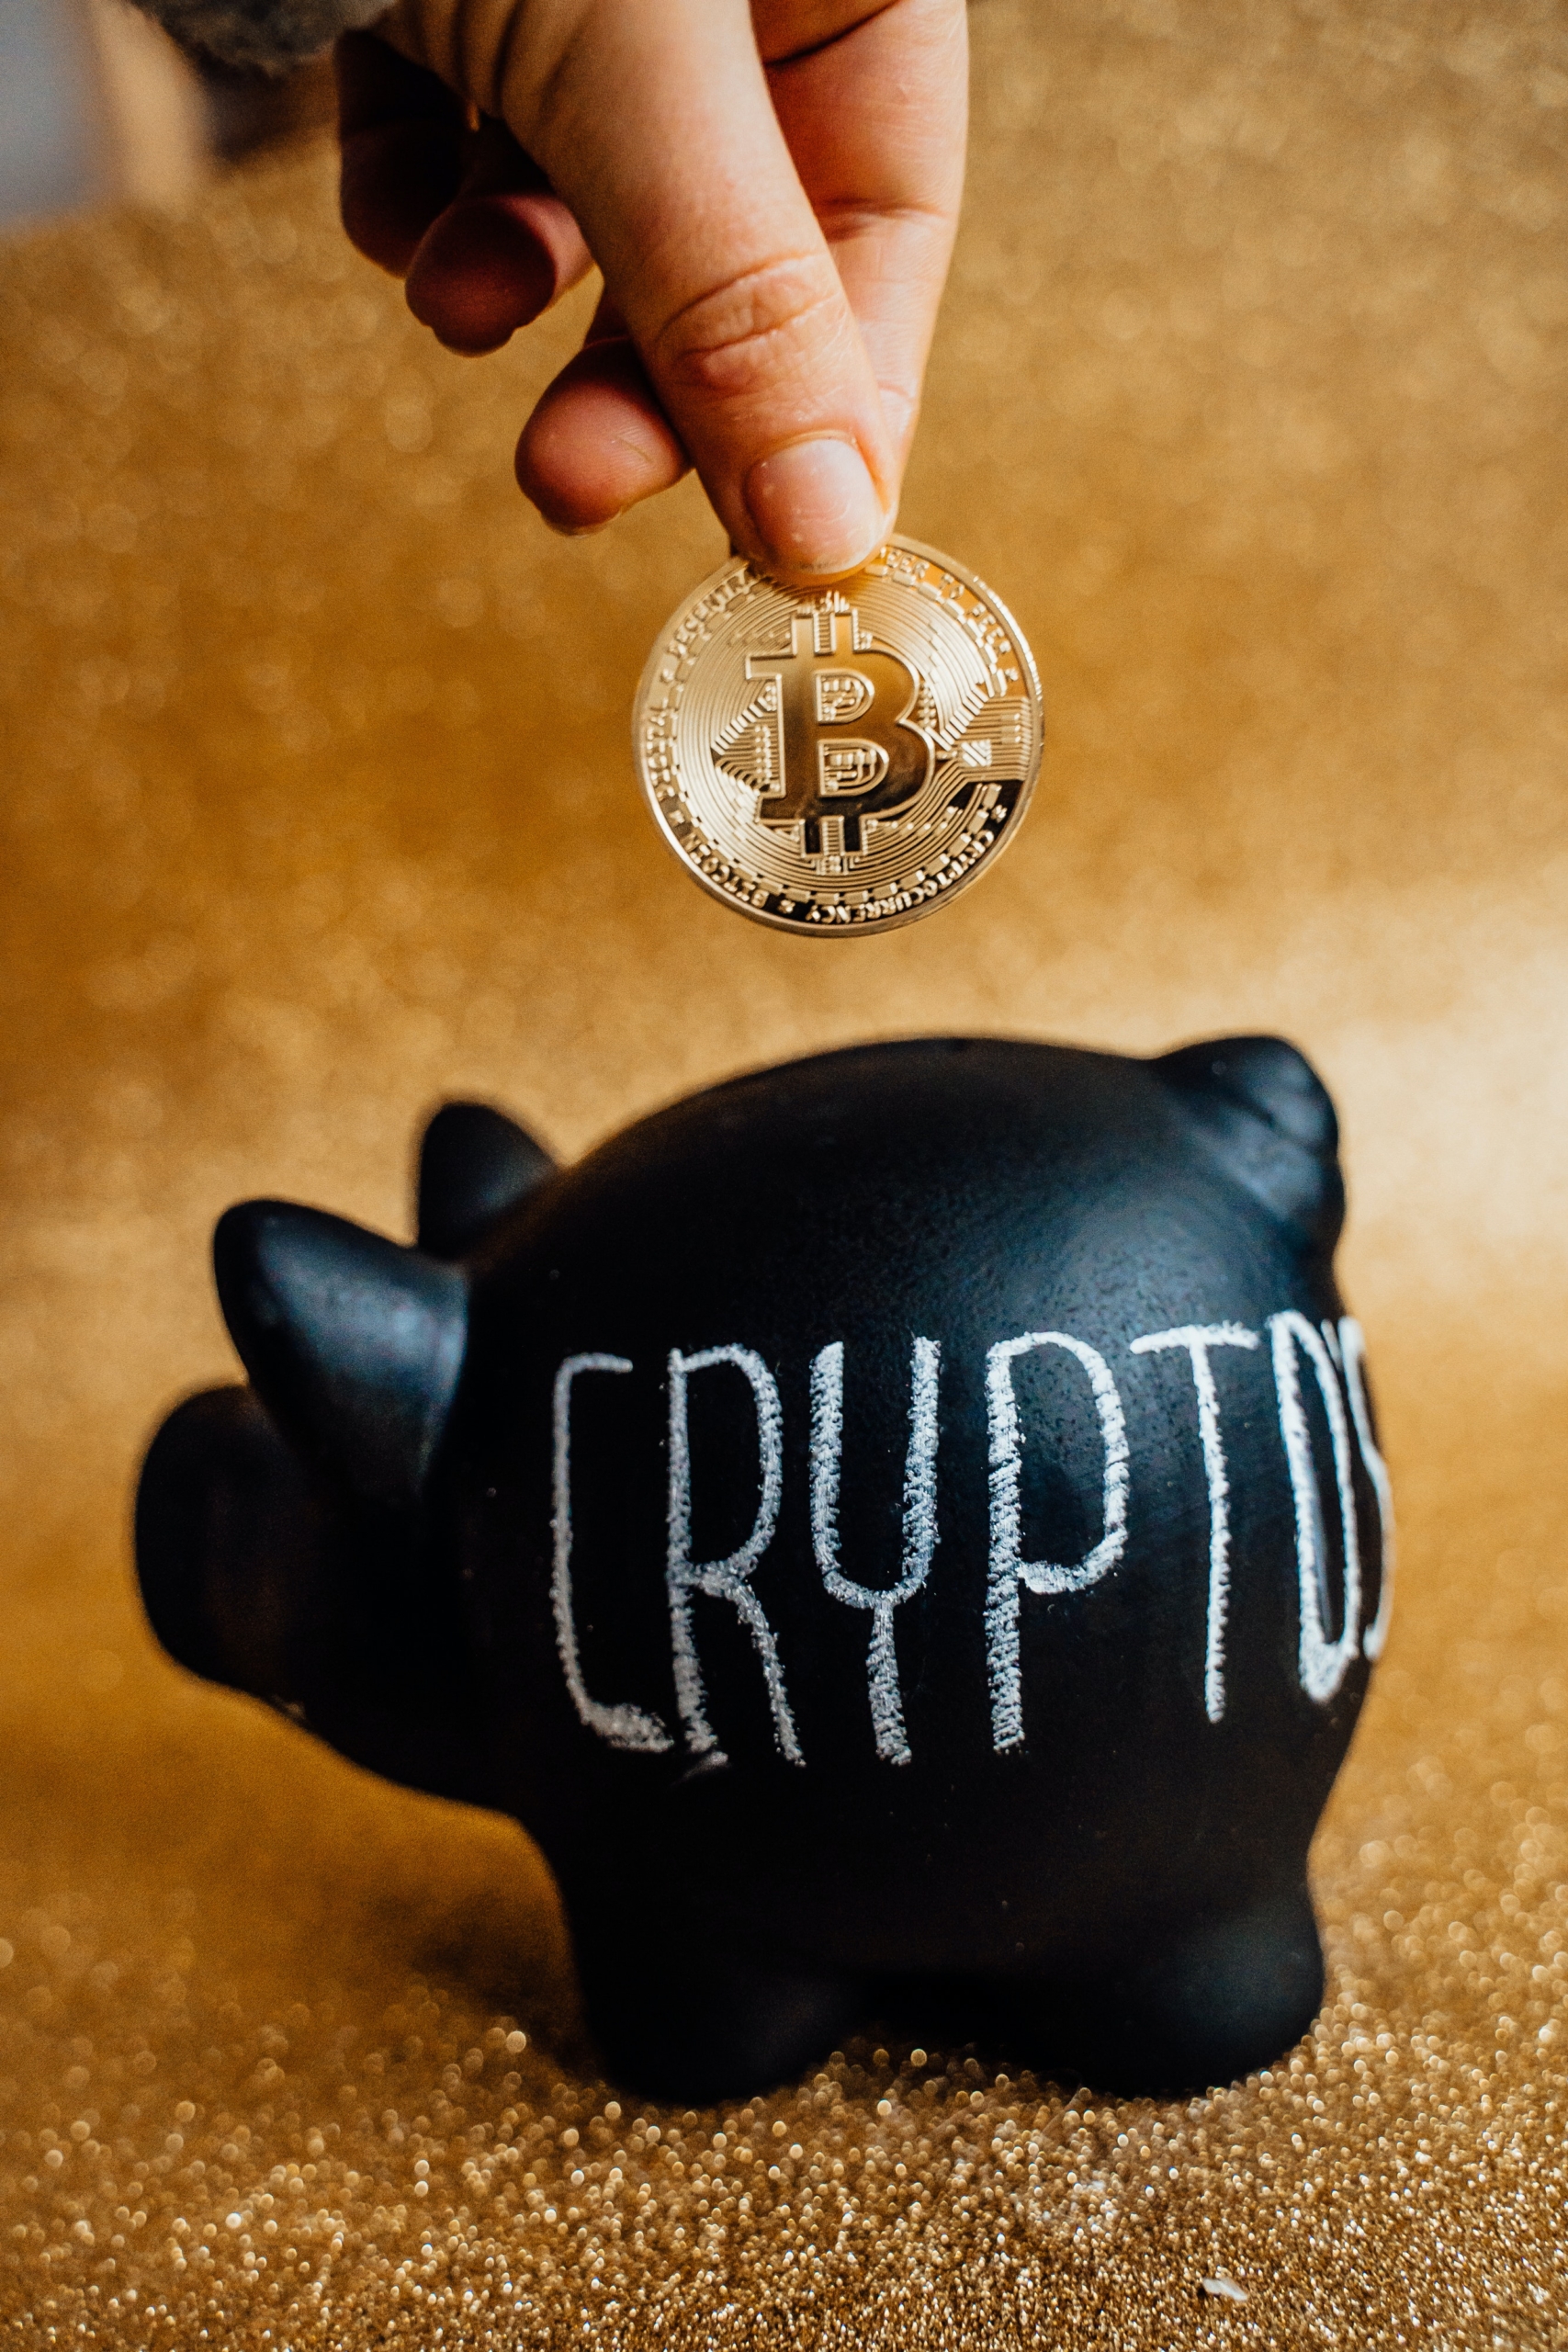 Crypto currency going into piggy bank